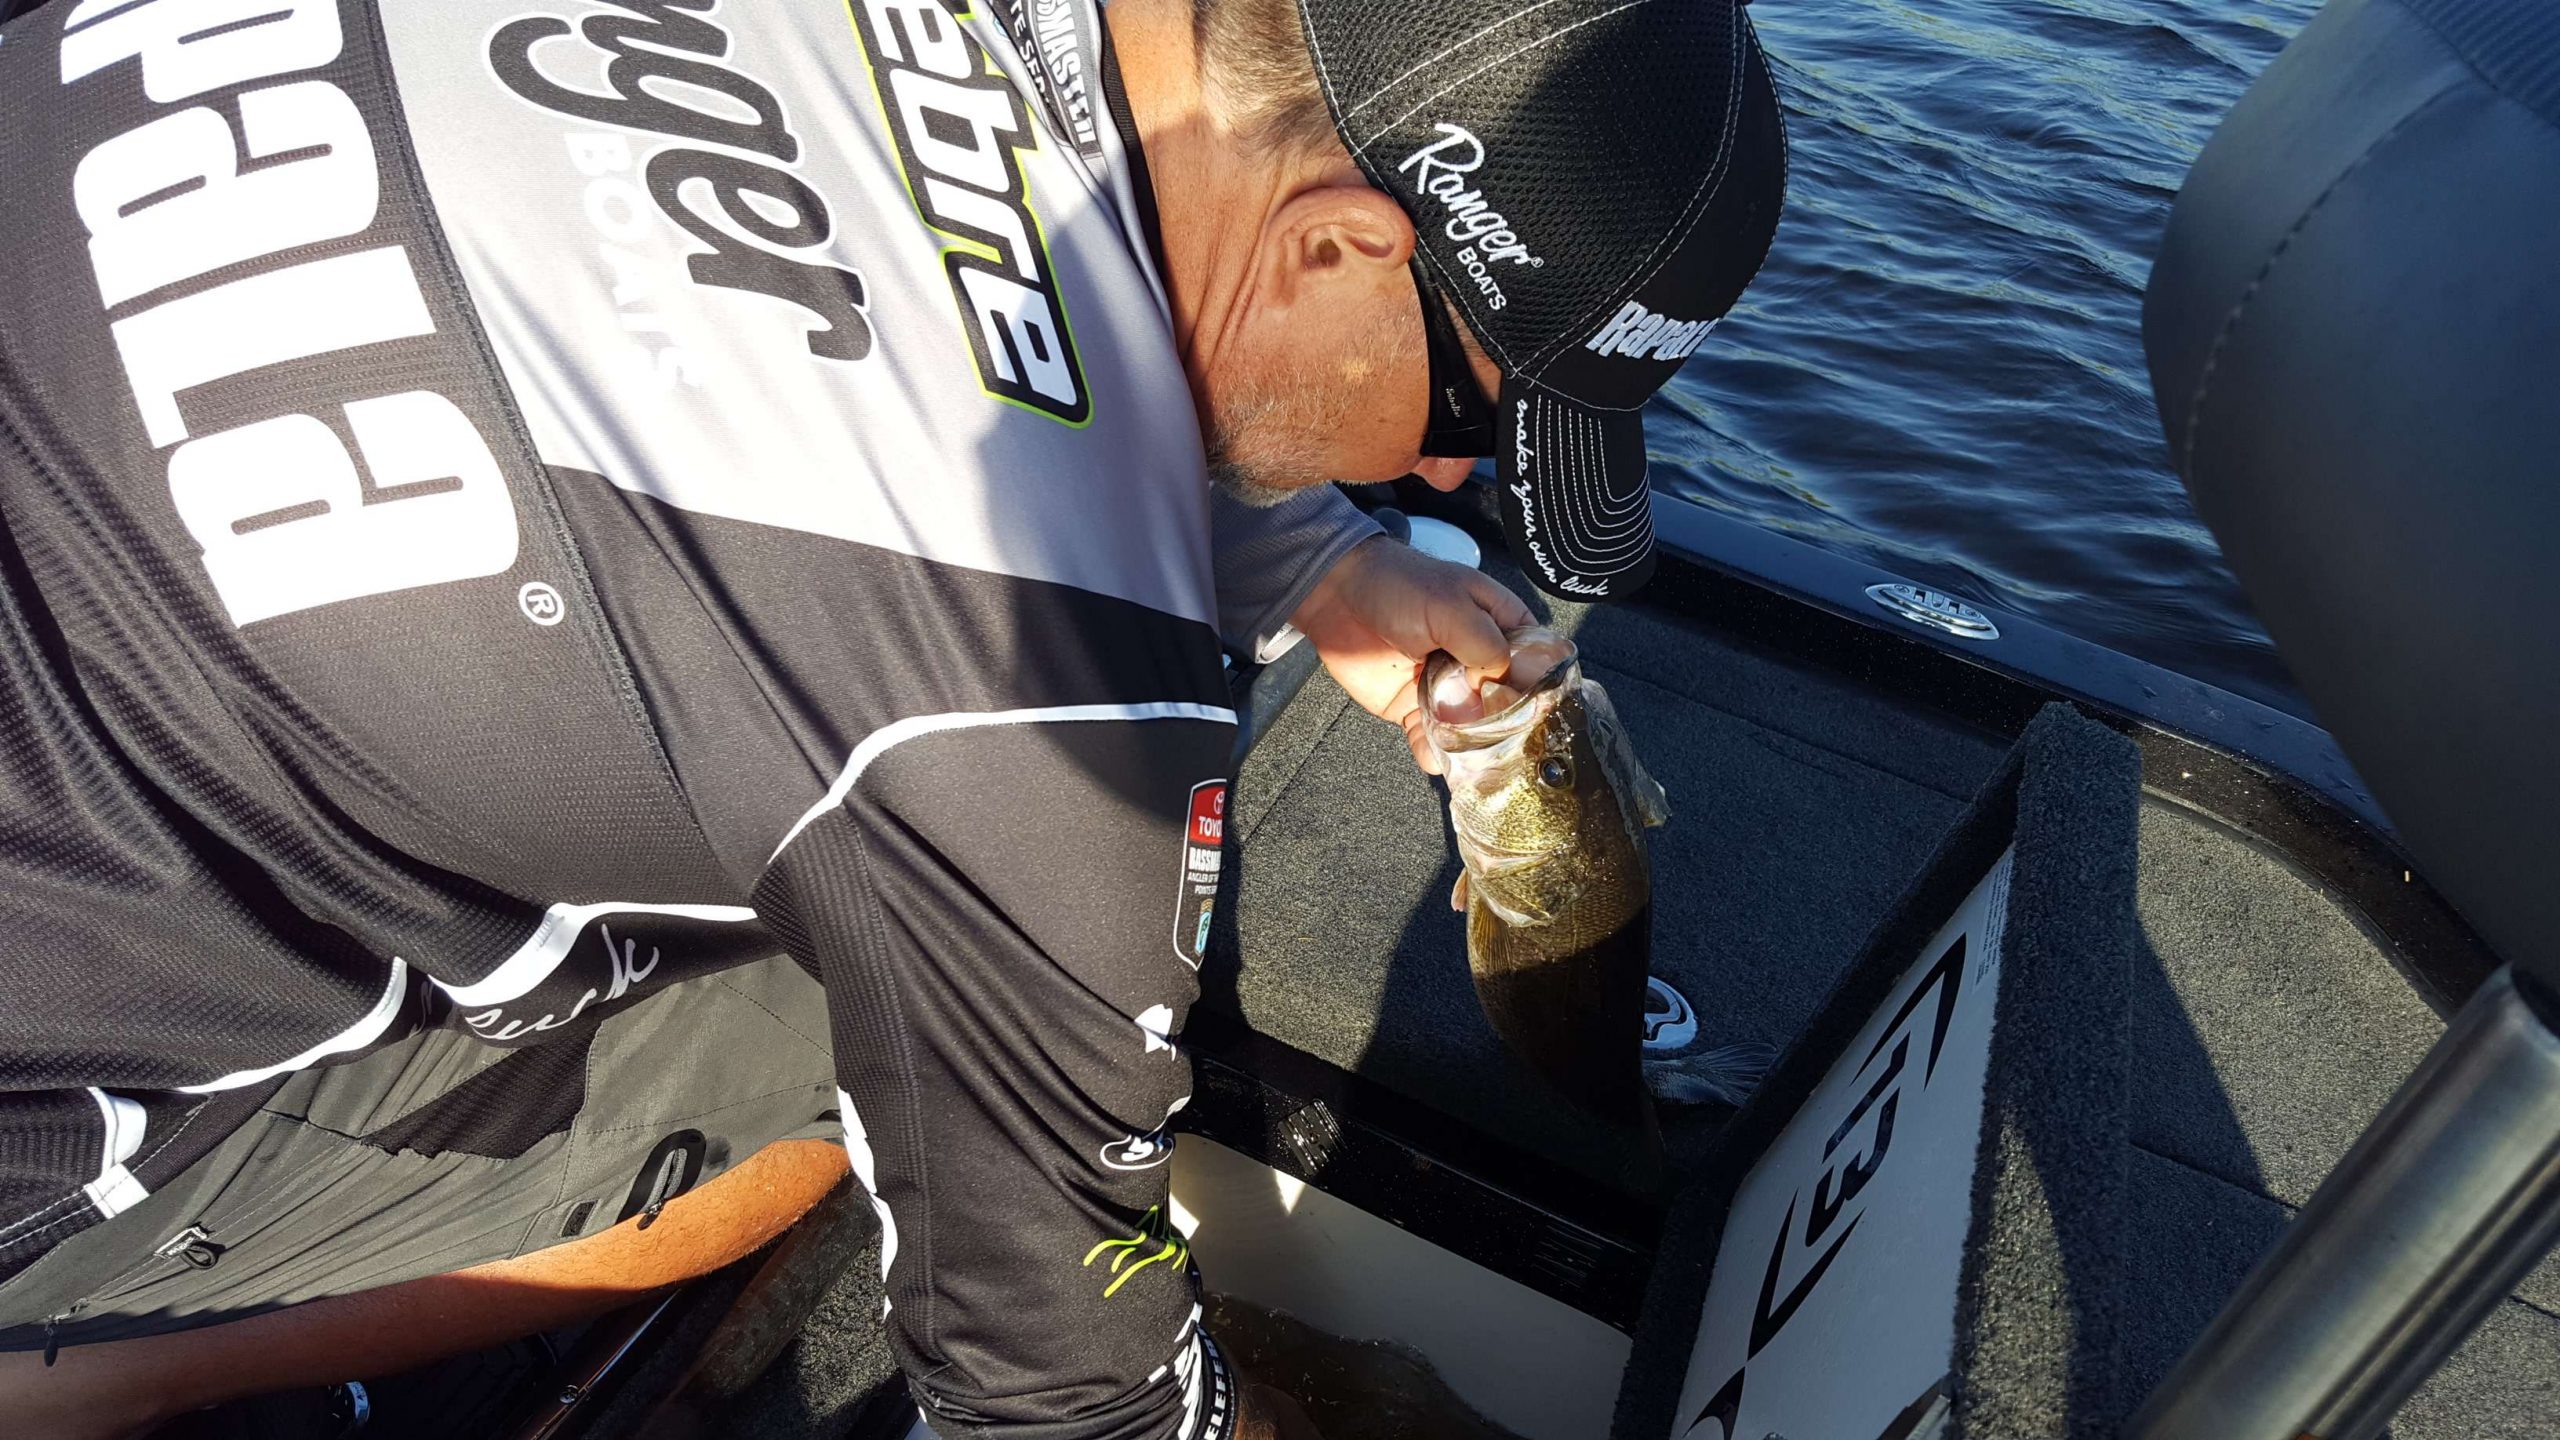 Dave Lefebre misses a 5 pounder and then hooks this one on the next cast! 